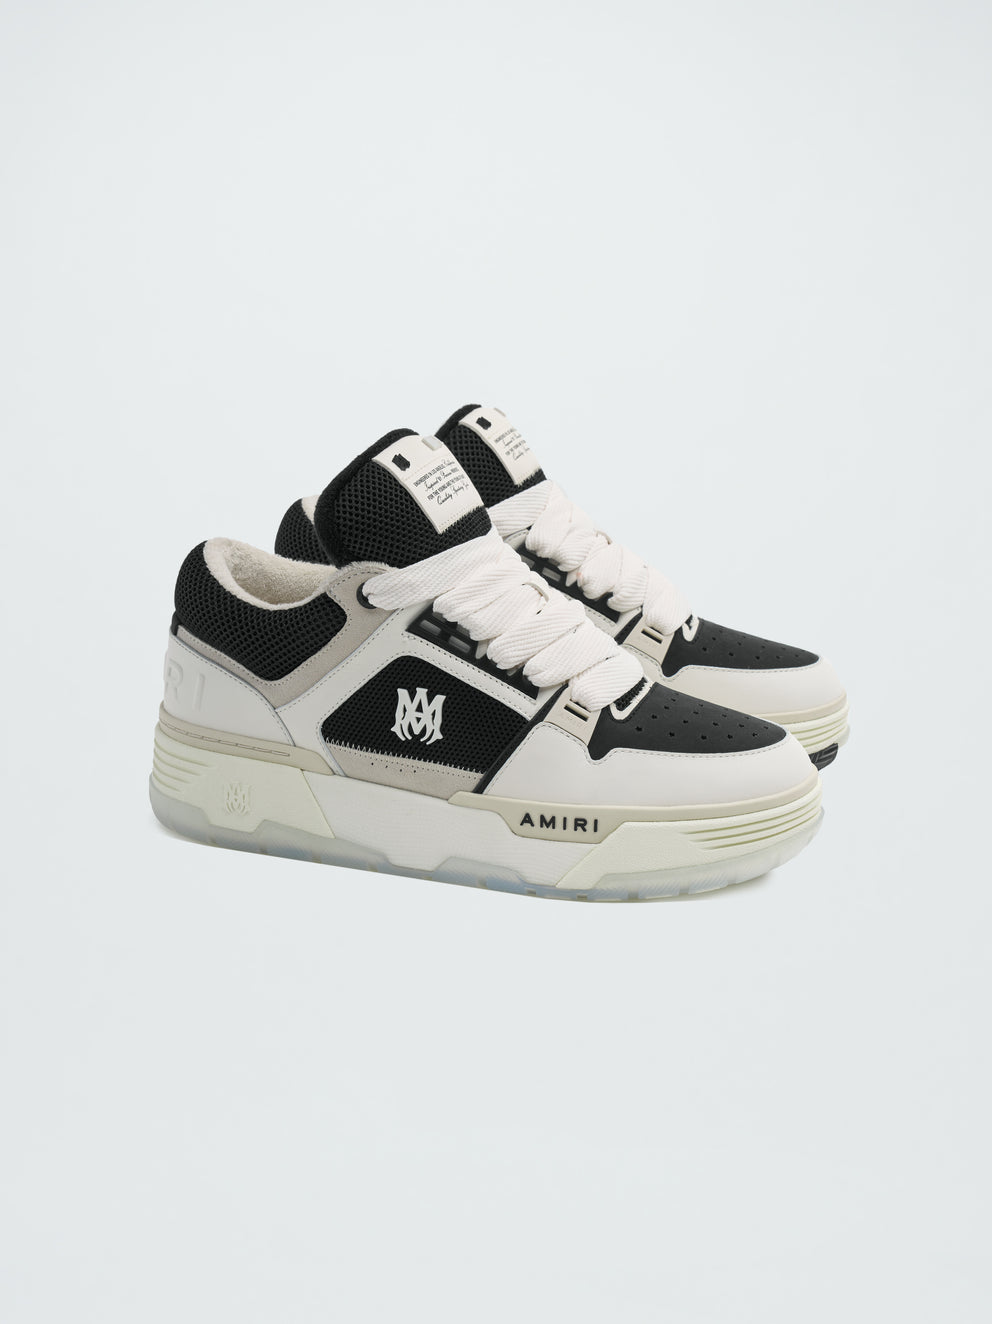 Amiri Sneakers Outlet Factory Shop - White / Black Mens MA-1